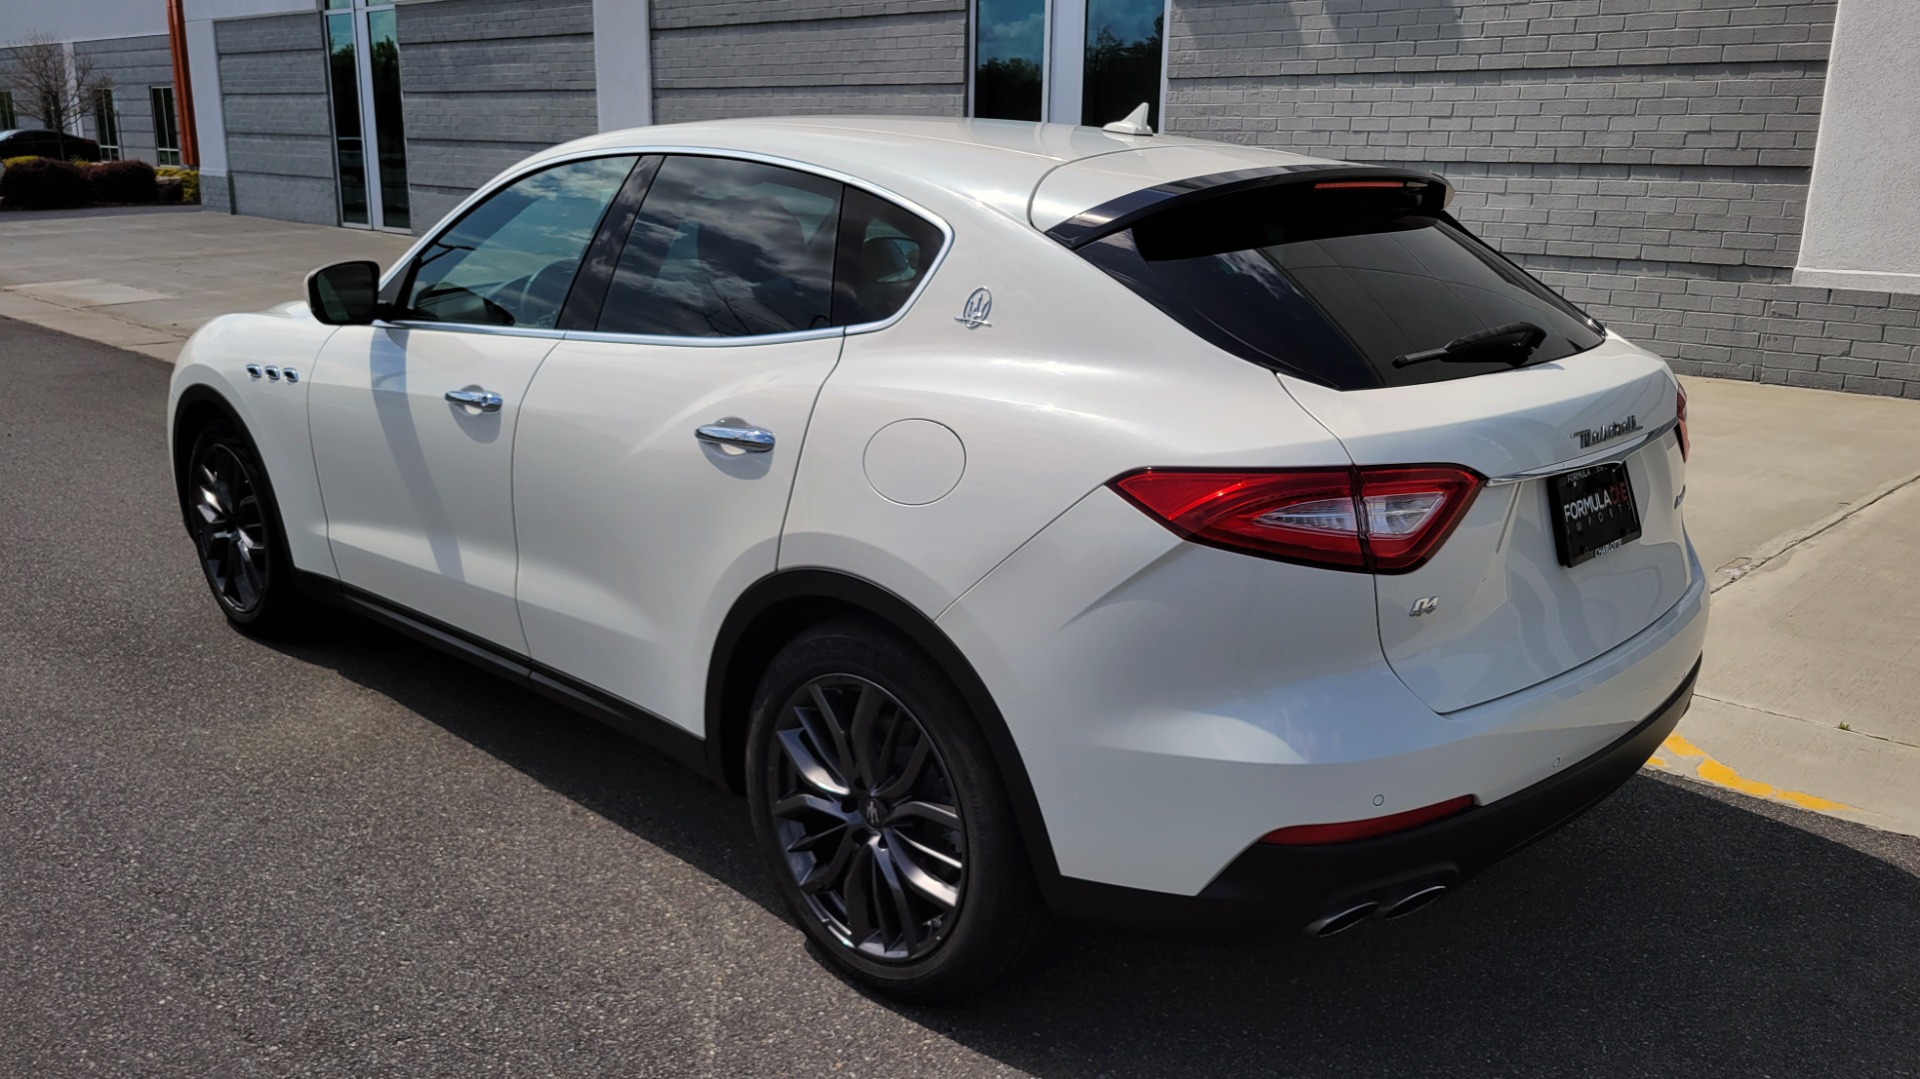 Used 2018 Maserati LEVANTE 3.0L 345HP SUV / 8-SPD / PREMIUM / BSA / NAV / 20IN WHLS / REARVIEW for sale $50,495 at Formula Imports in Charlotte NC 28227 6